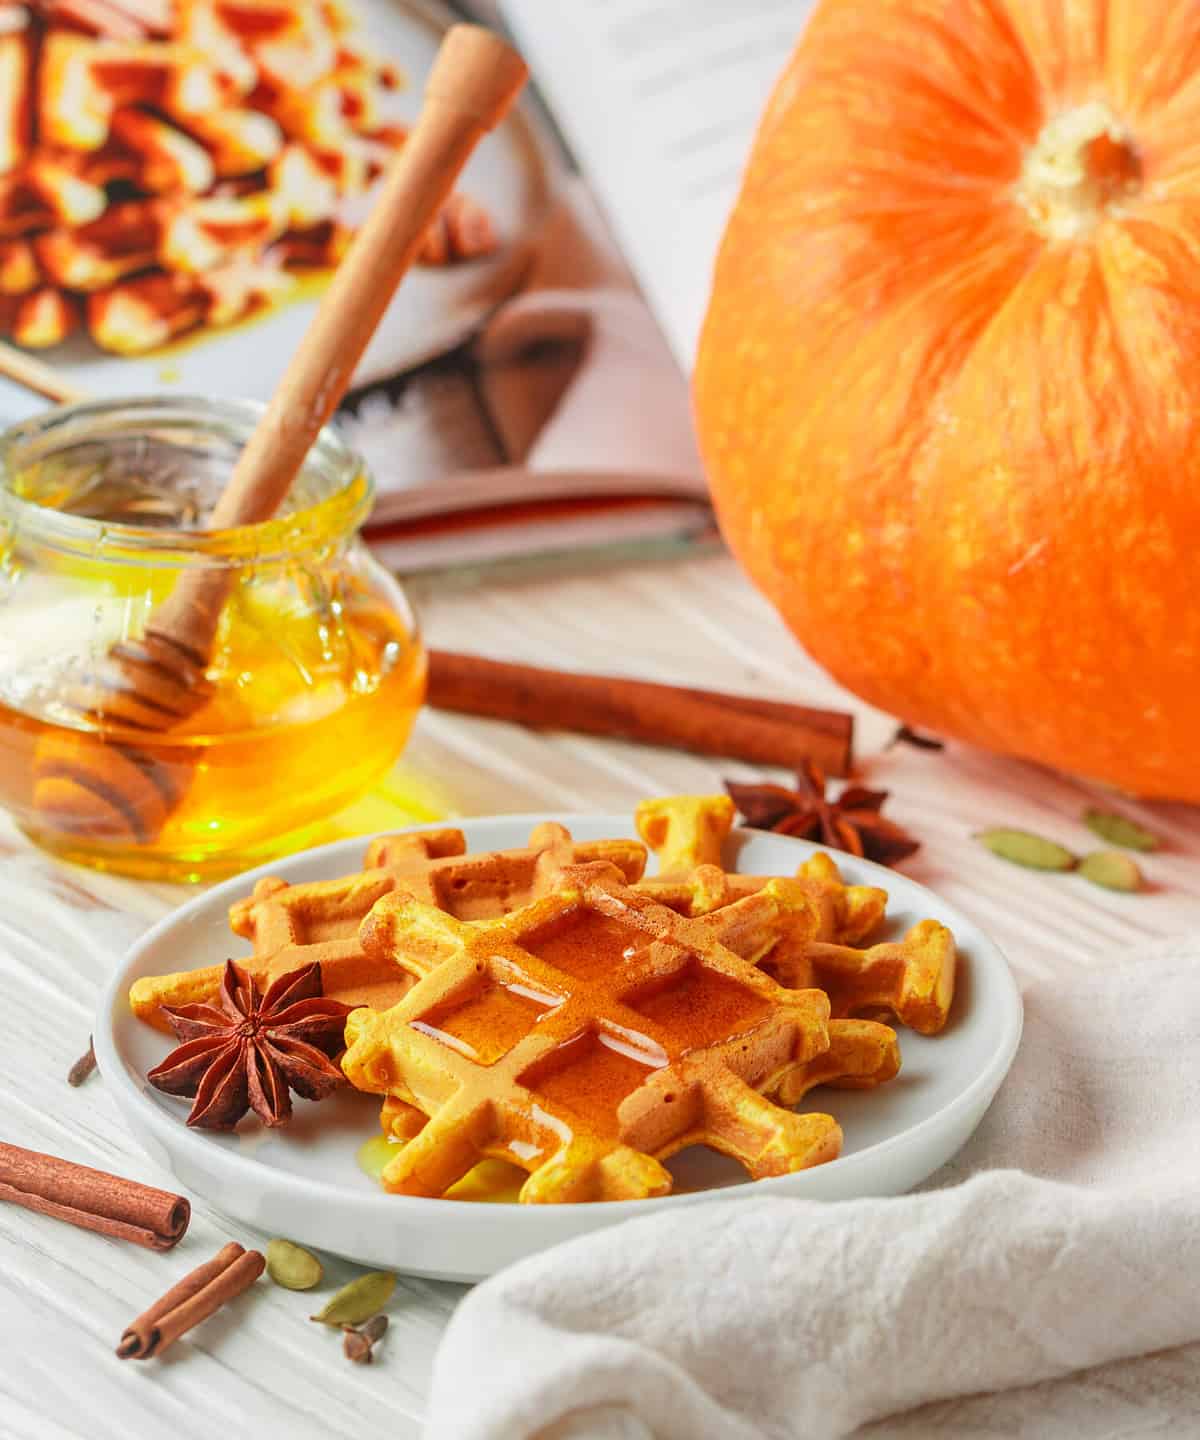 Delicious homemade healthy pumpkin spice Belgian or Viennese waffles with spices cinnamon, anise, cardamom. Served with honey. Gourmet Breakfast. The concept of home fall baking. Selective focus